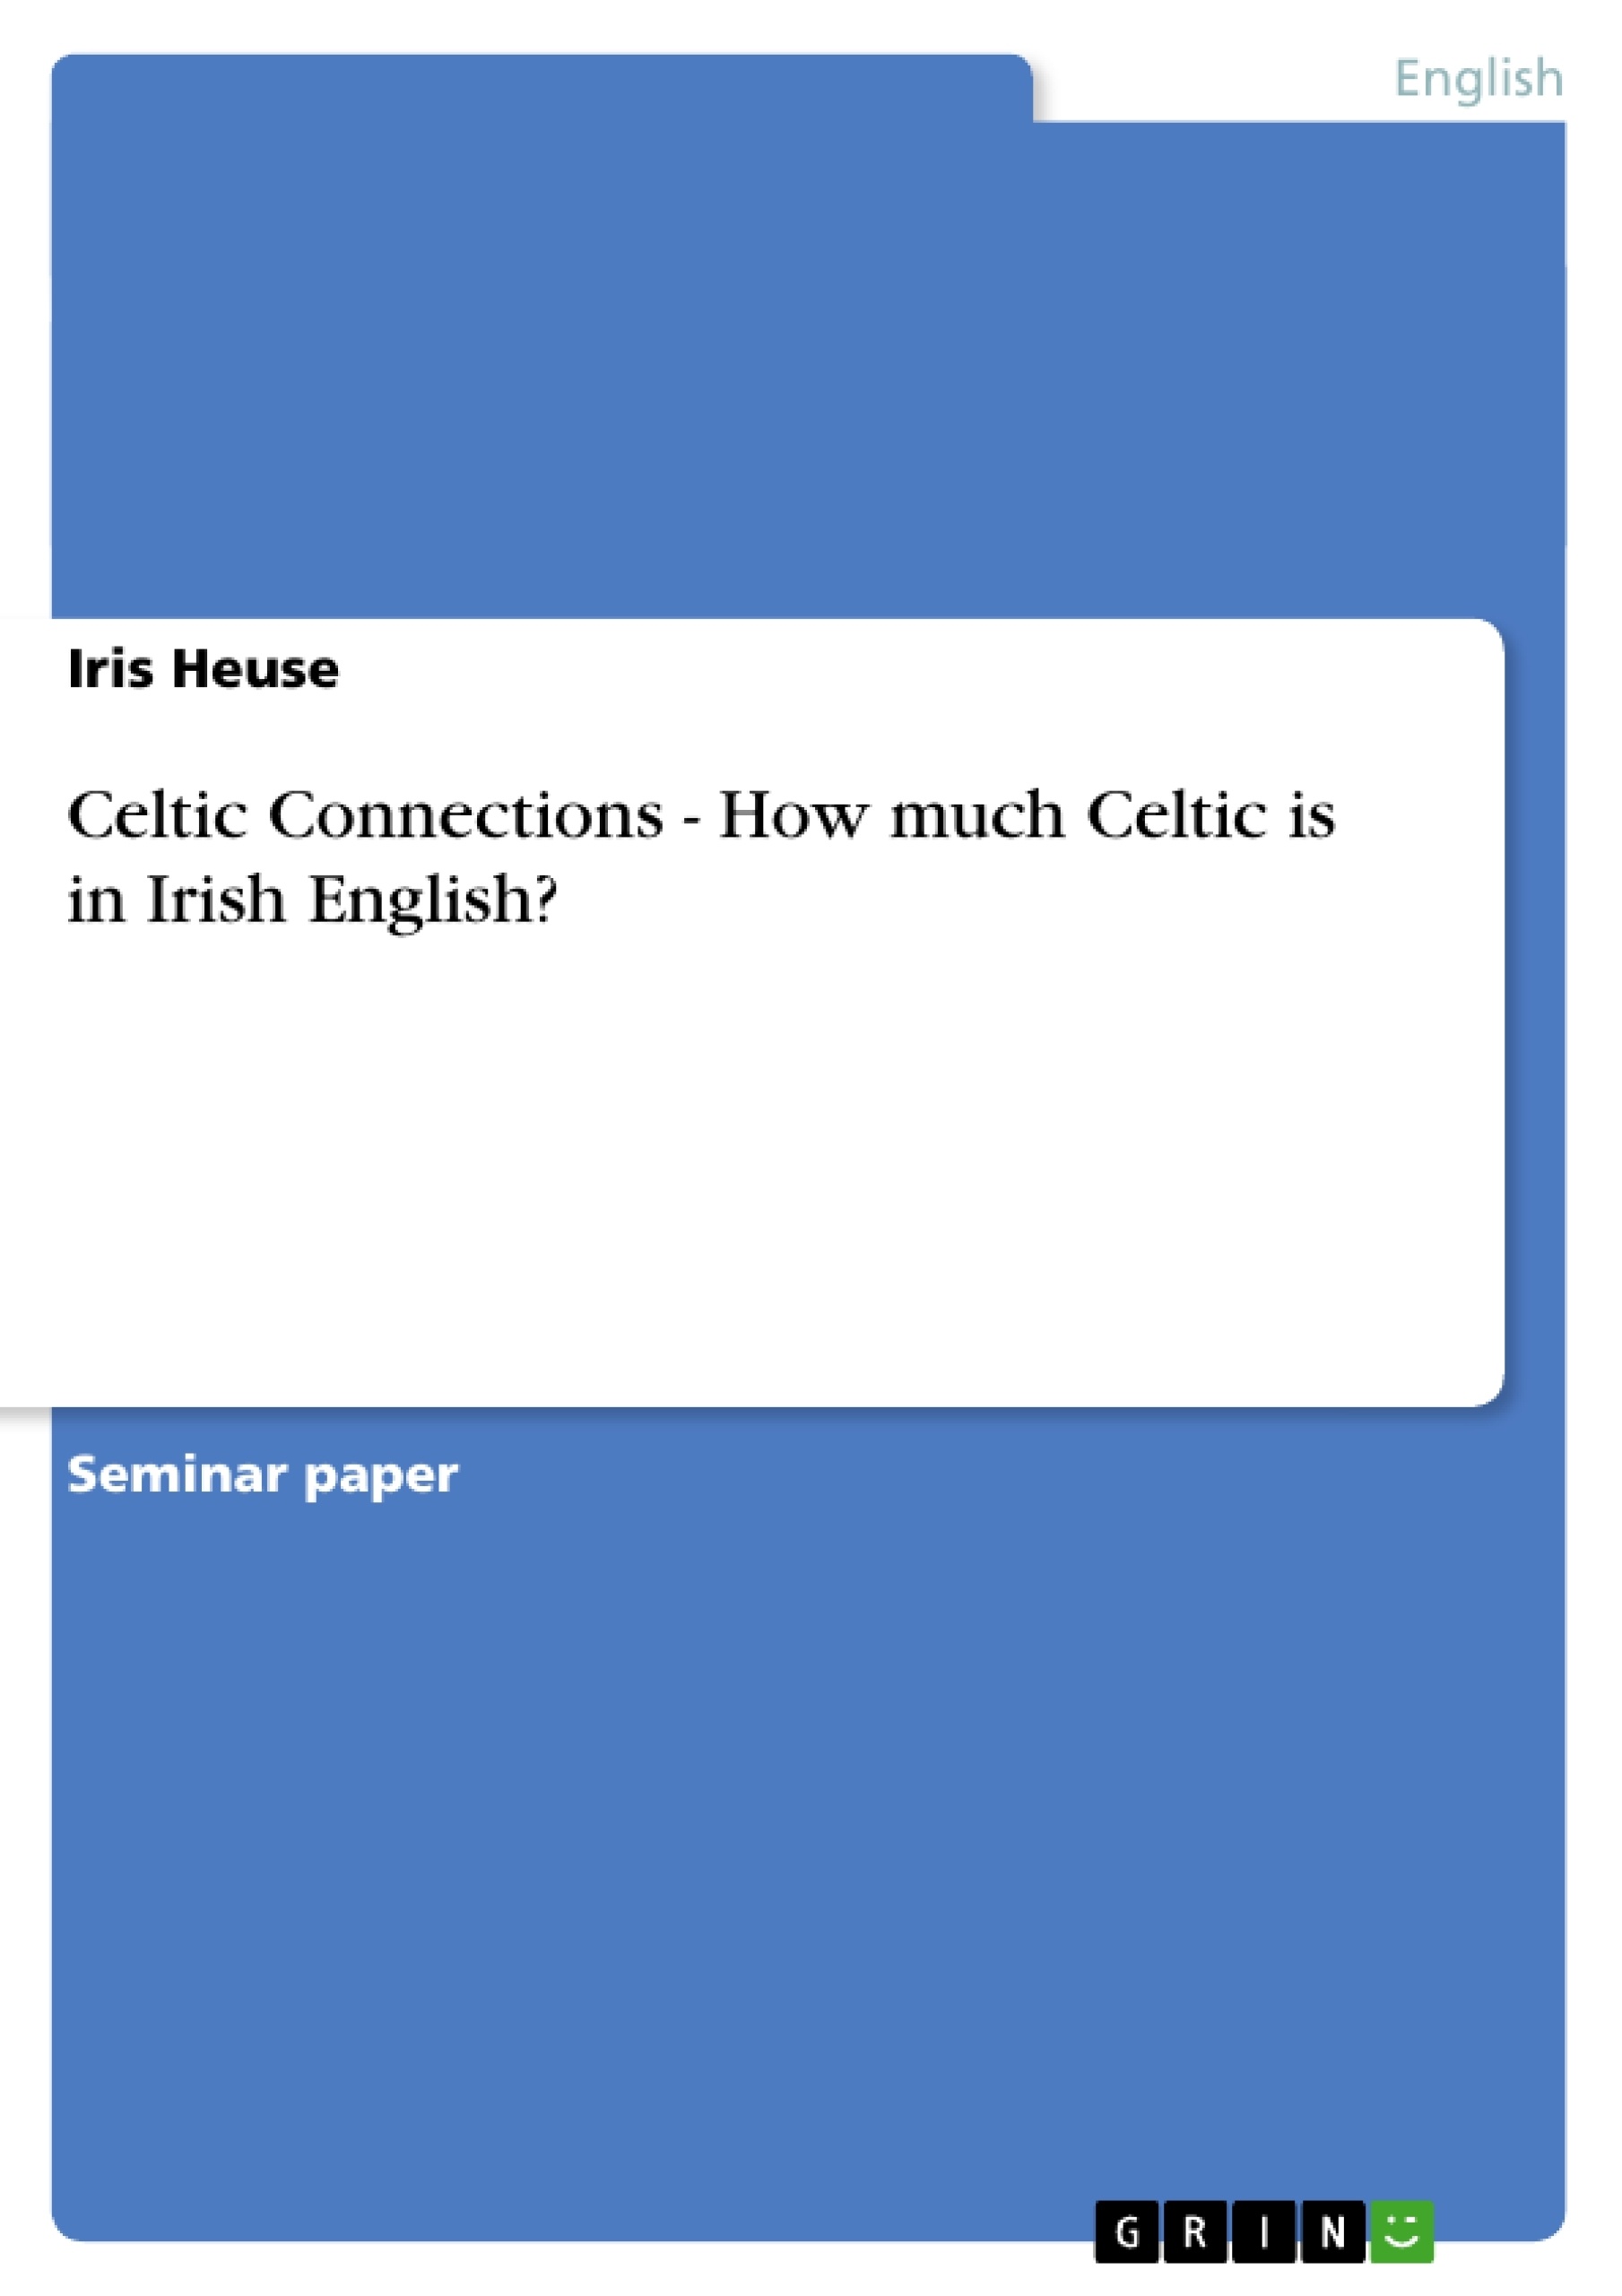 Title: Celtic Connections - How much Celtic is in Irish English?